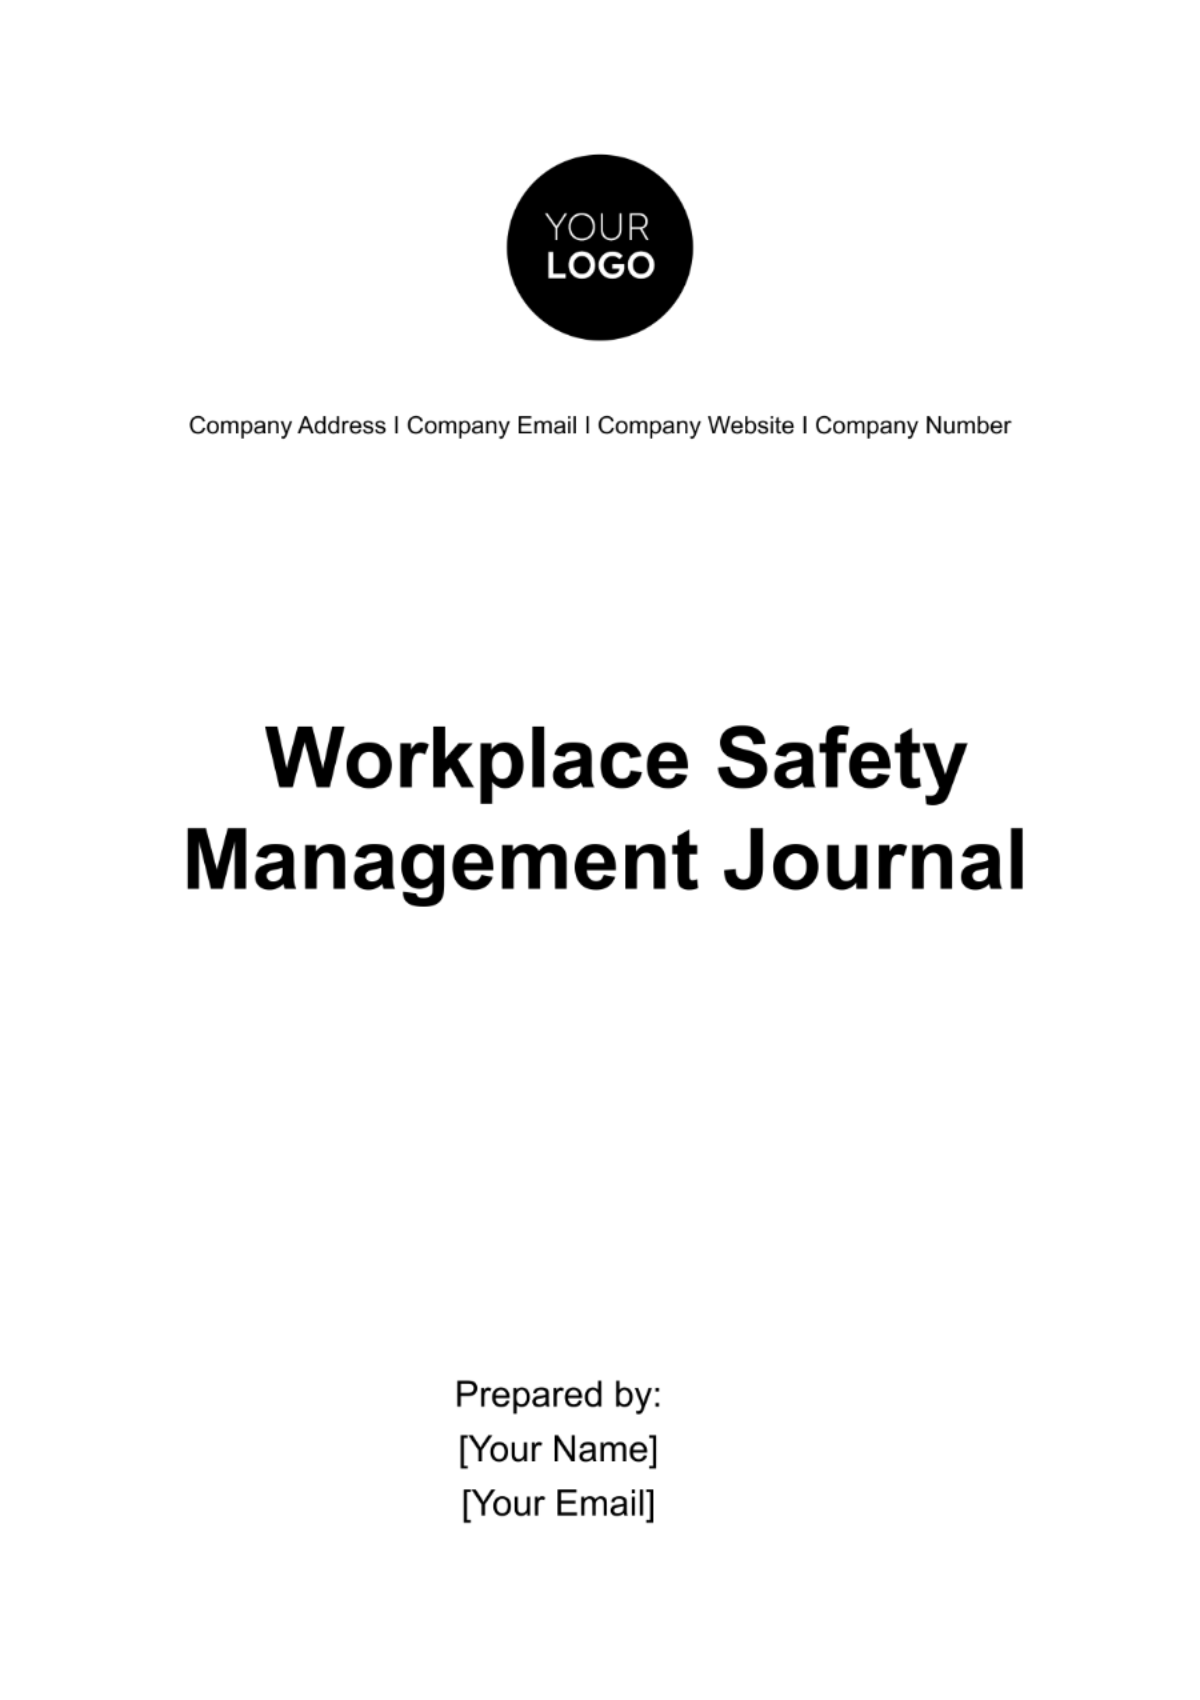 Workplace Safety Management Journal Template